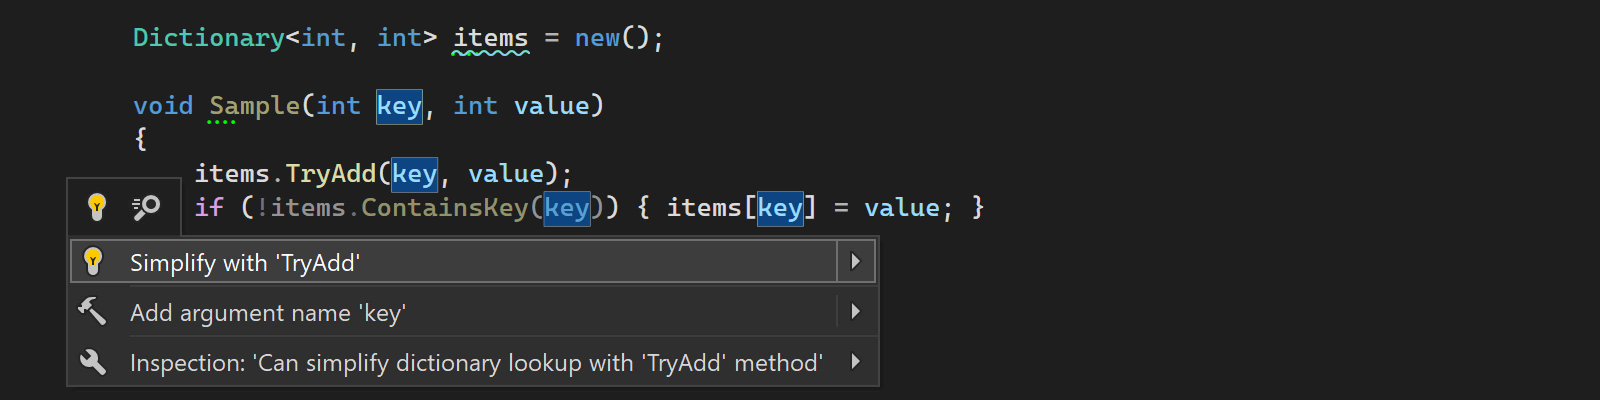 To use TryAdd(key, value)